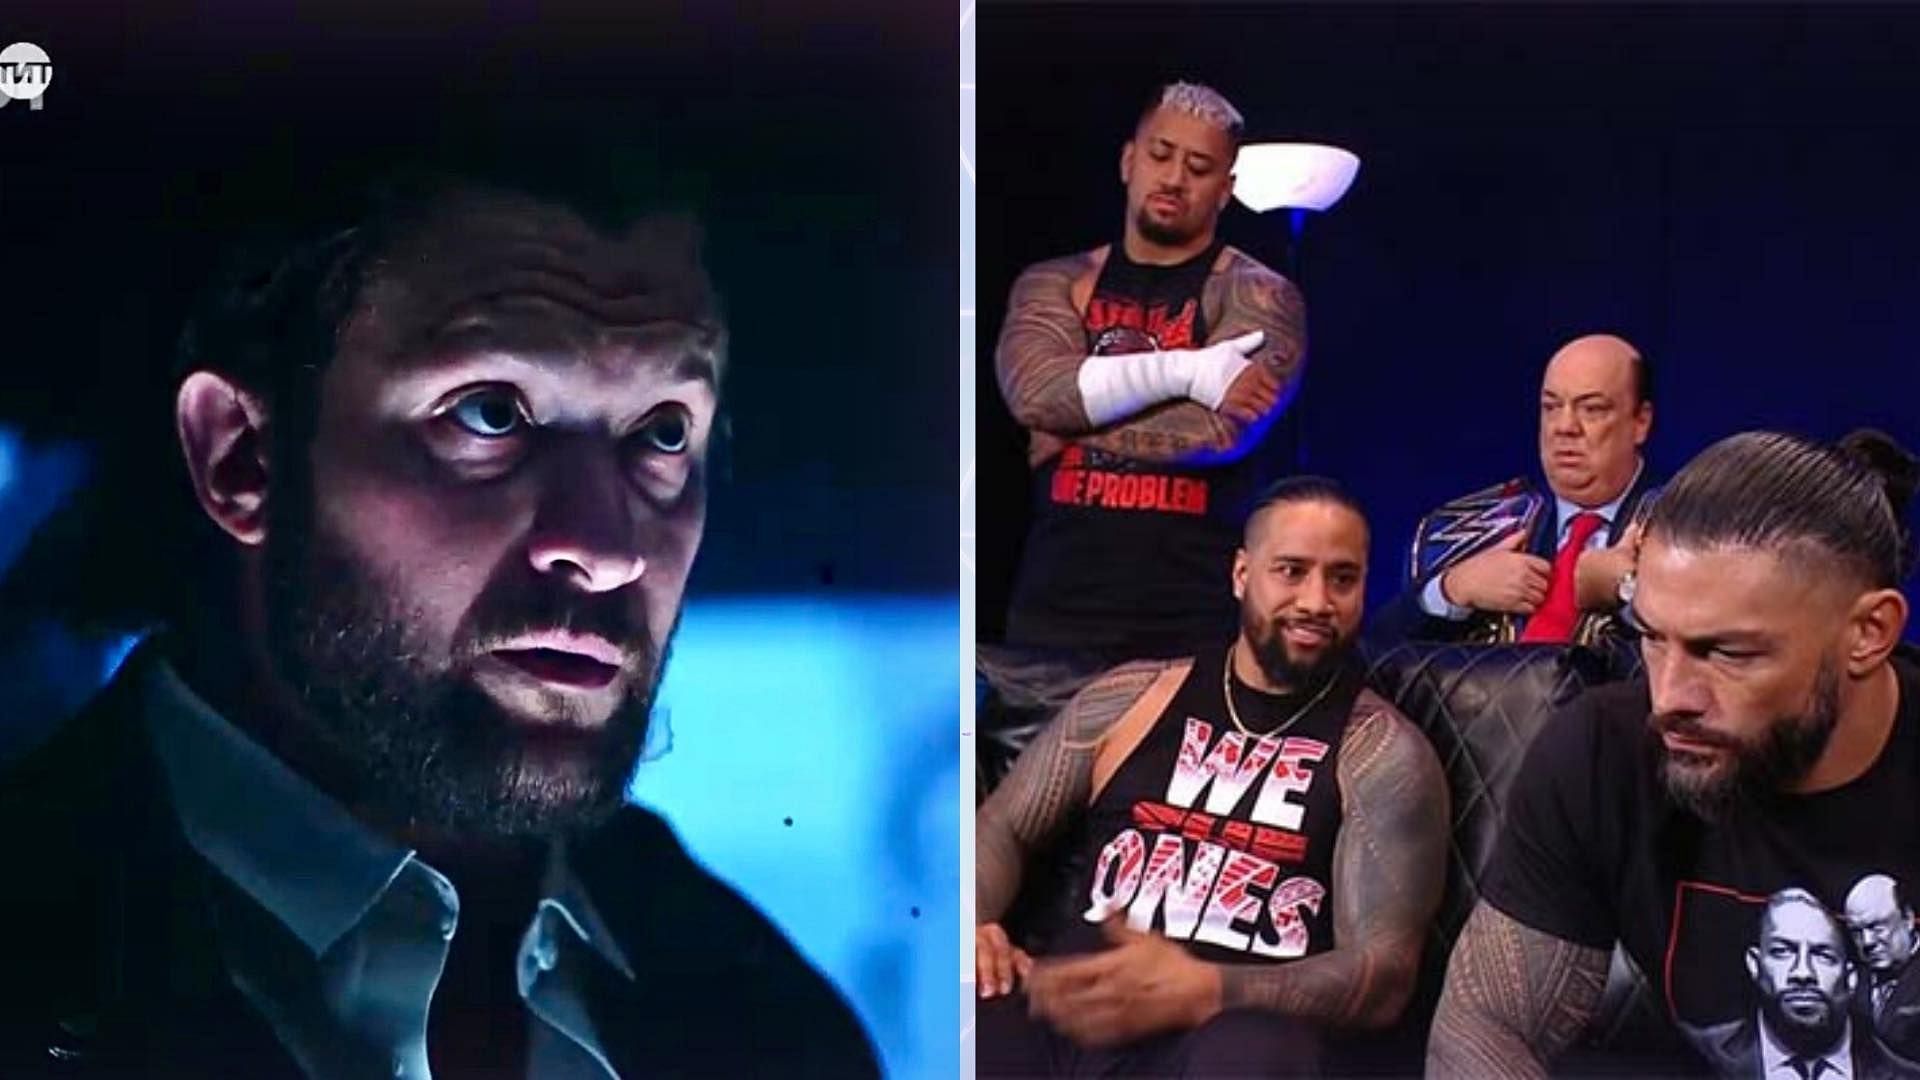 Karrion Kross has seemingly formed a new stable with returning WWE stars